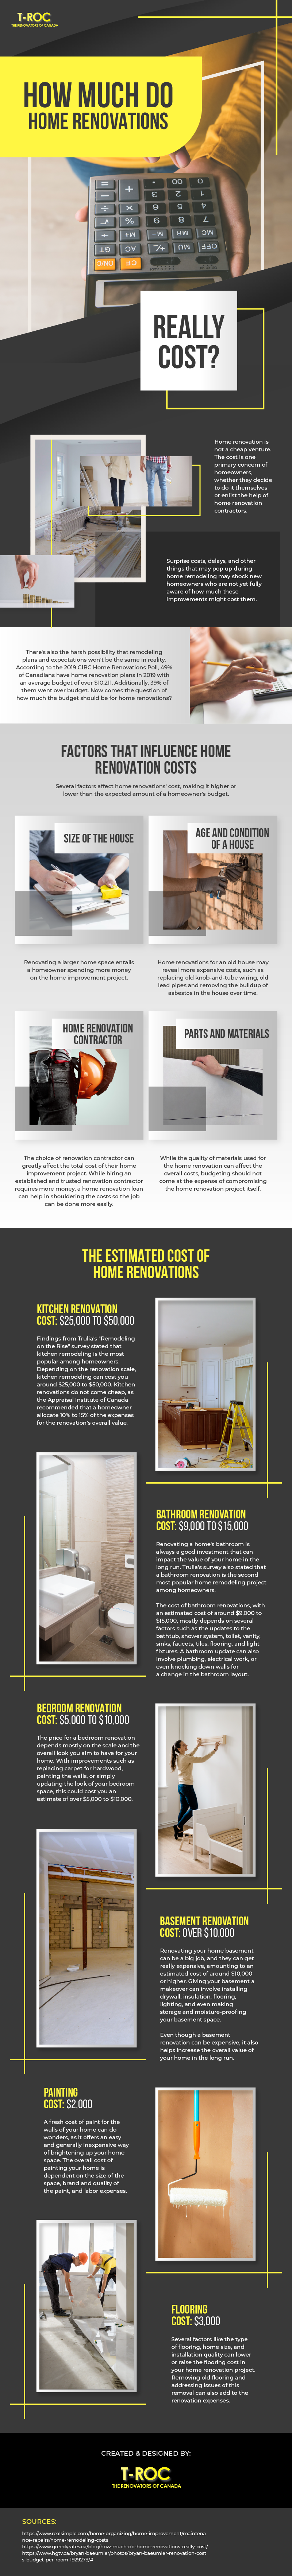 How Much Do Home Renovations Really Cost? (infographic)